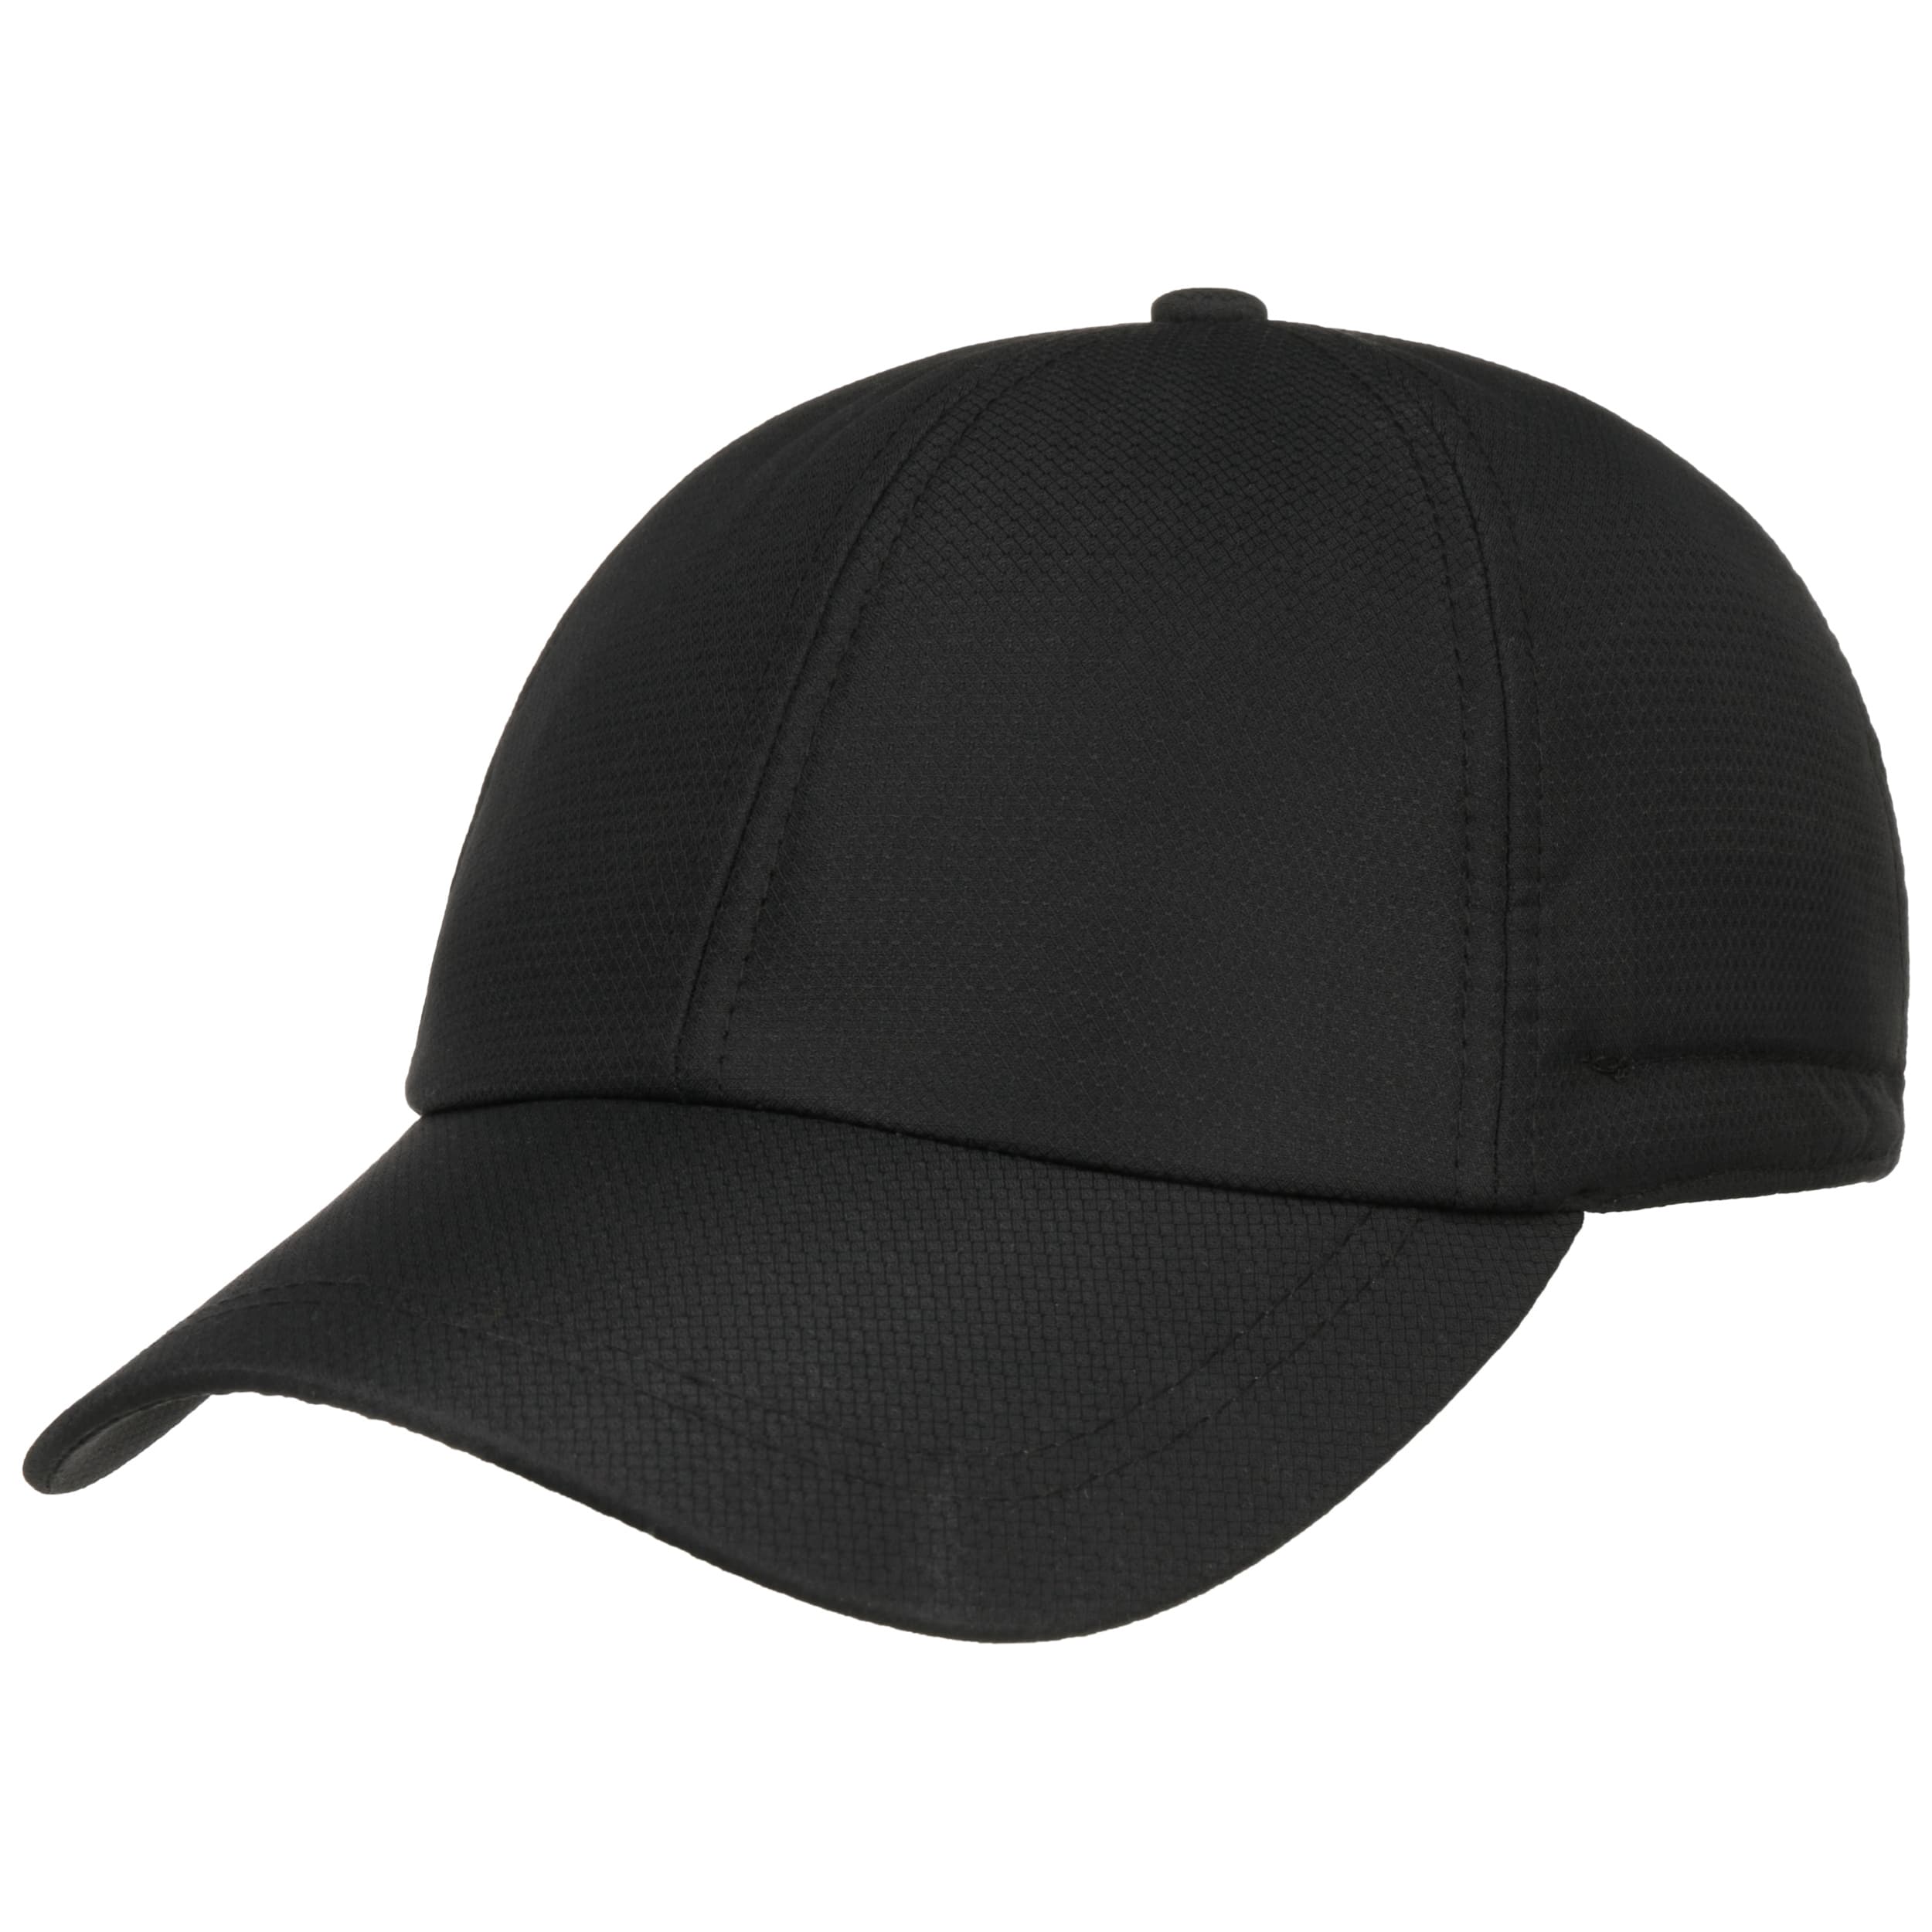 3M Thinsulate Cap mit Ohrenklappen - € by 29,95 Lipodo